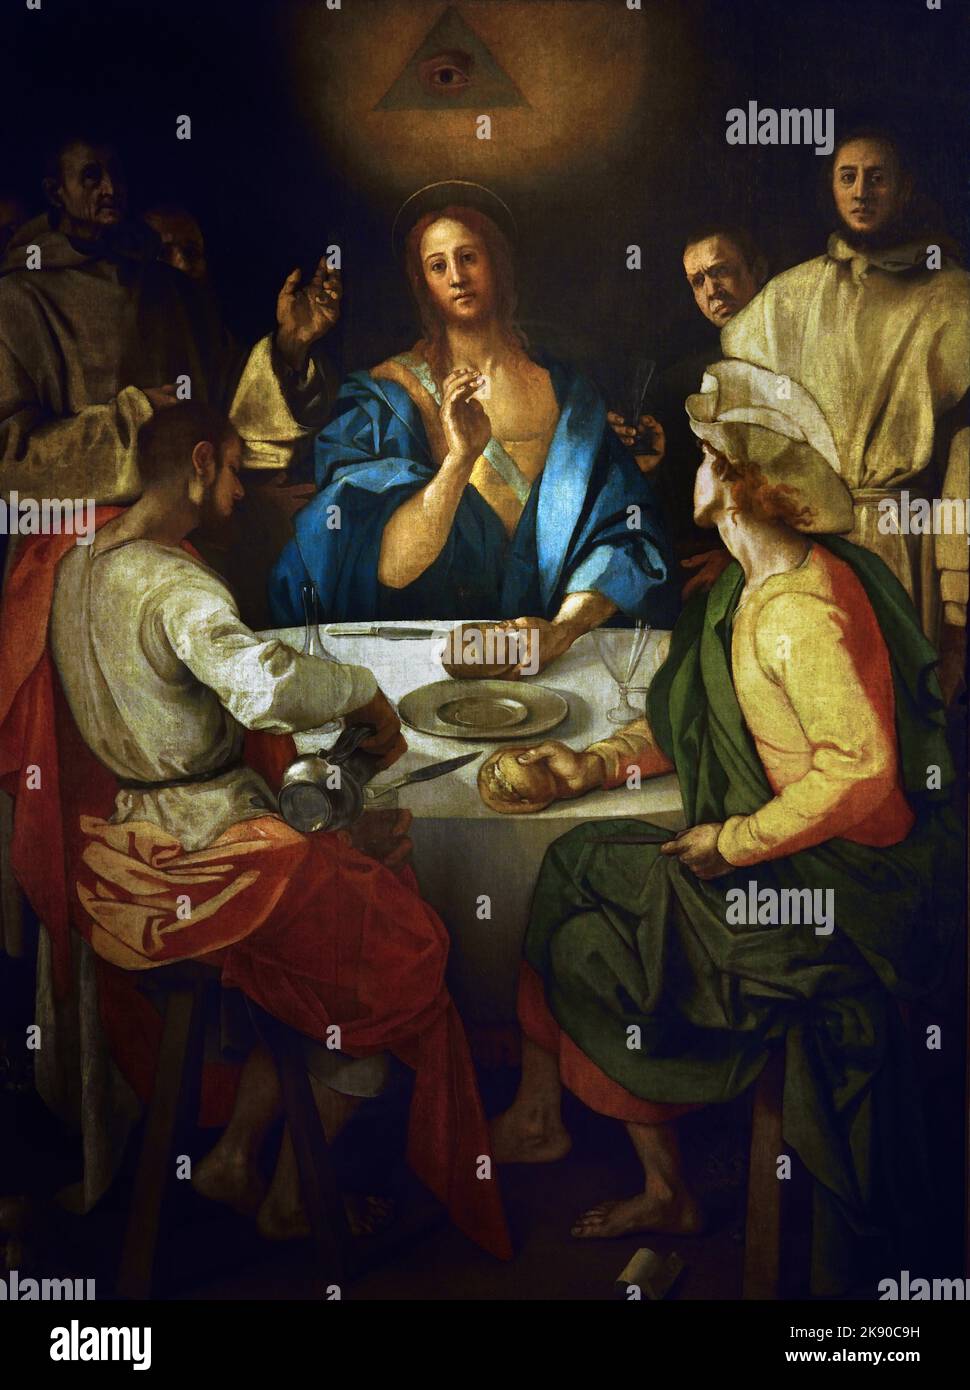 Supper at Emmaus Jacopo Carucci, known as Pontormo (Pontorme, Empoli, 1494 – Florence, 1552) , Florence, Italy. ( The painting is inspired by the engraving of the same subject in Dürer’s Small Passion series. ) Stock Photo